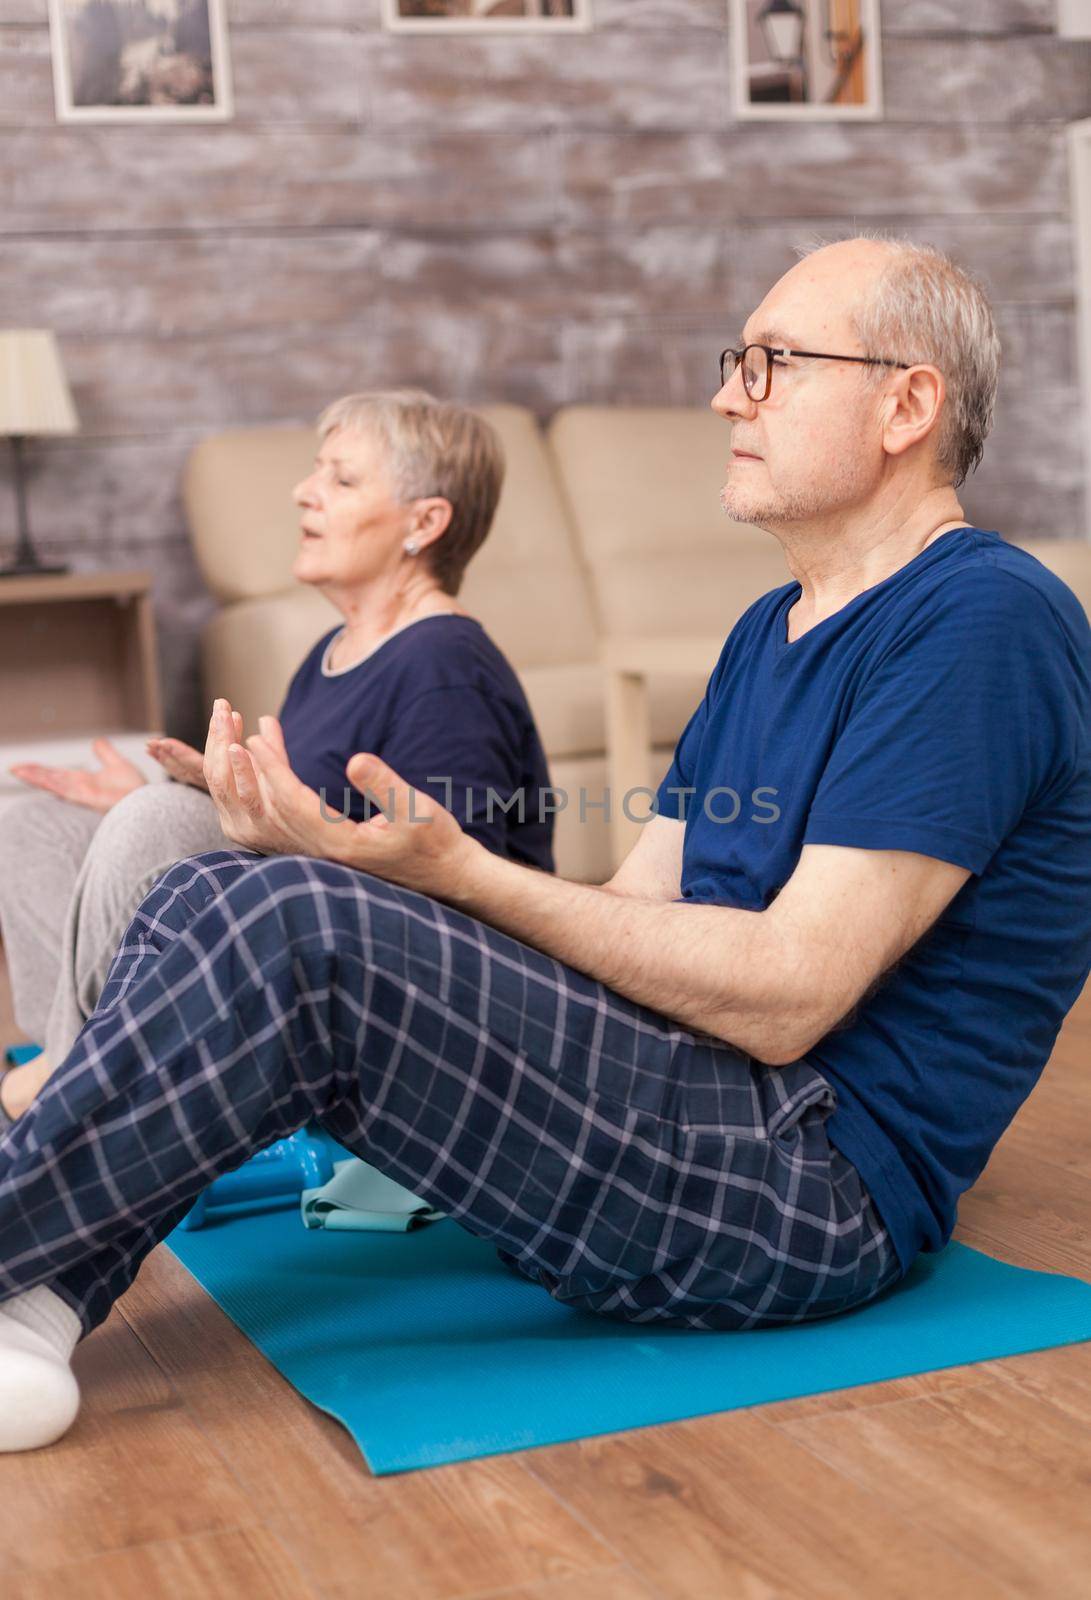 Pensioner learning yoga technique in their apartment. Old person healthy lifestyle exercise at home, workout and training, sport activity at home on yoga mat.